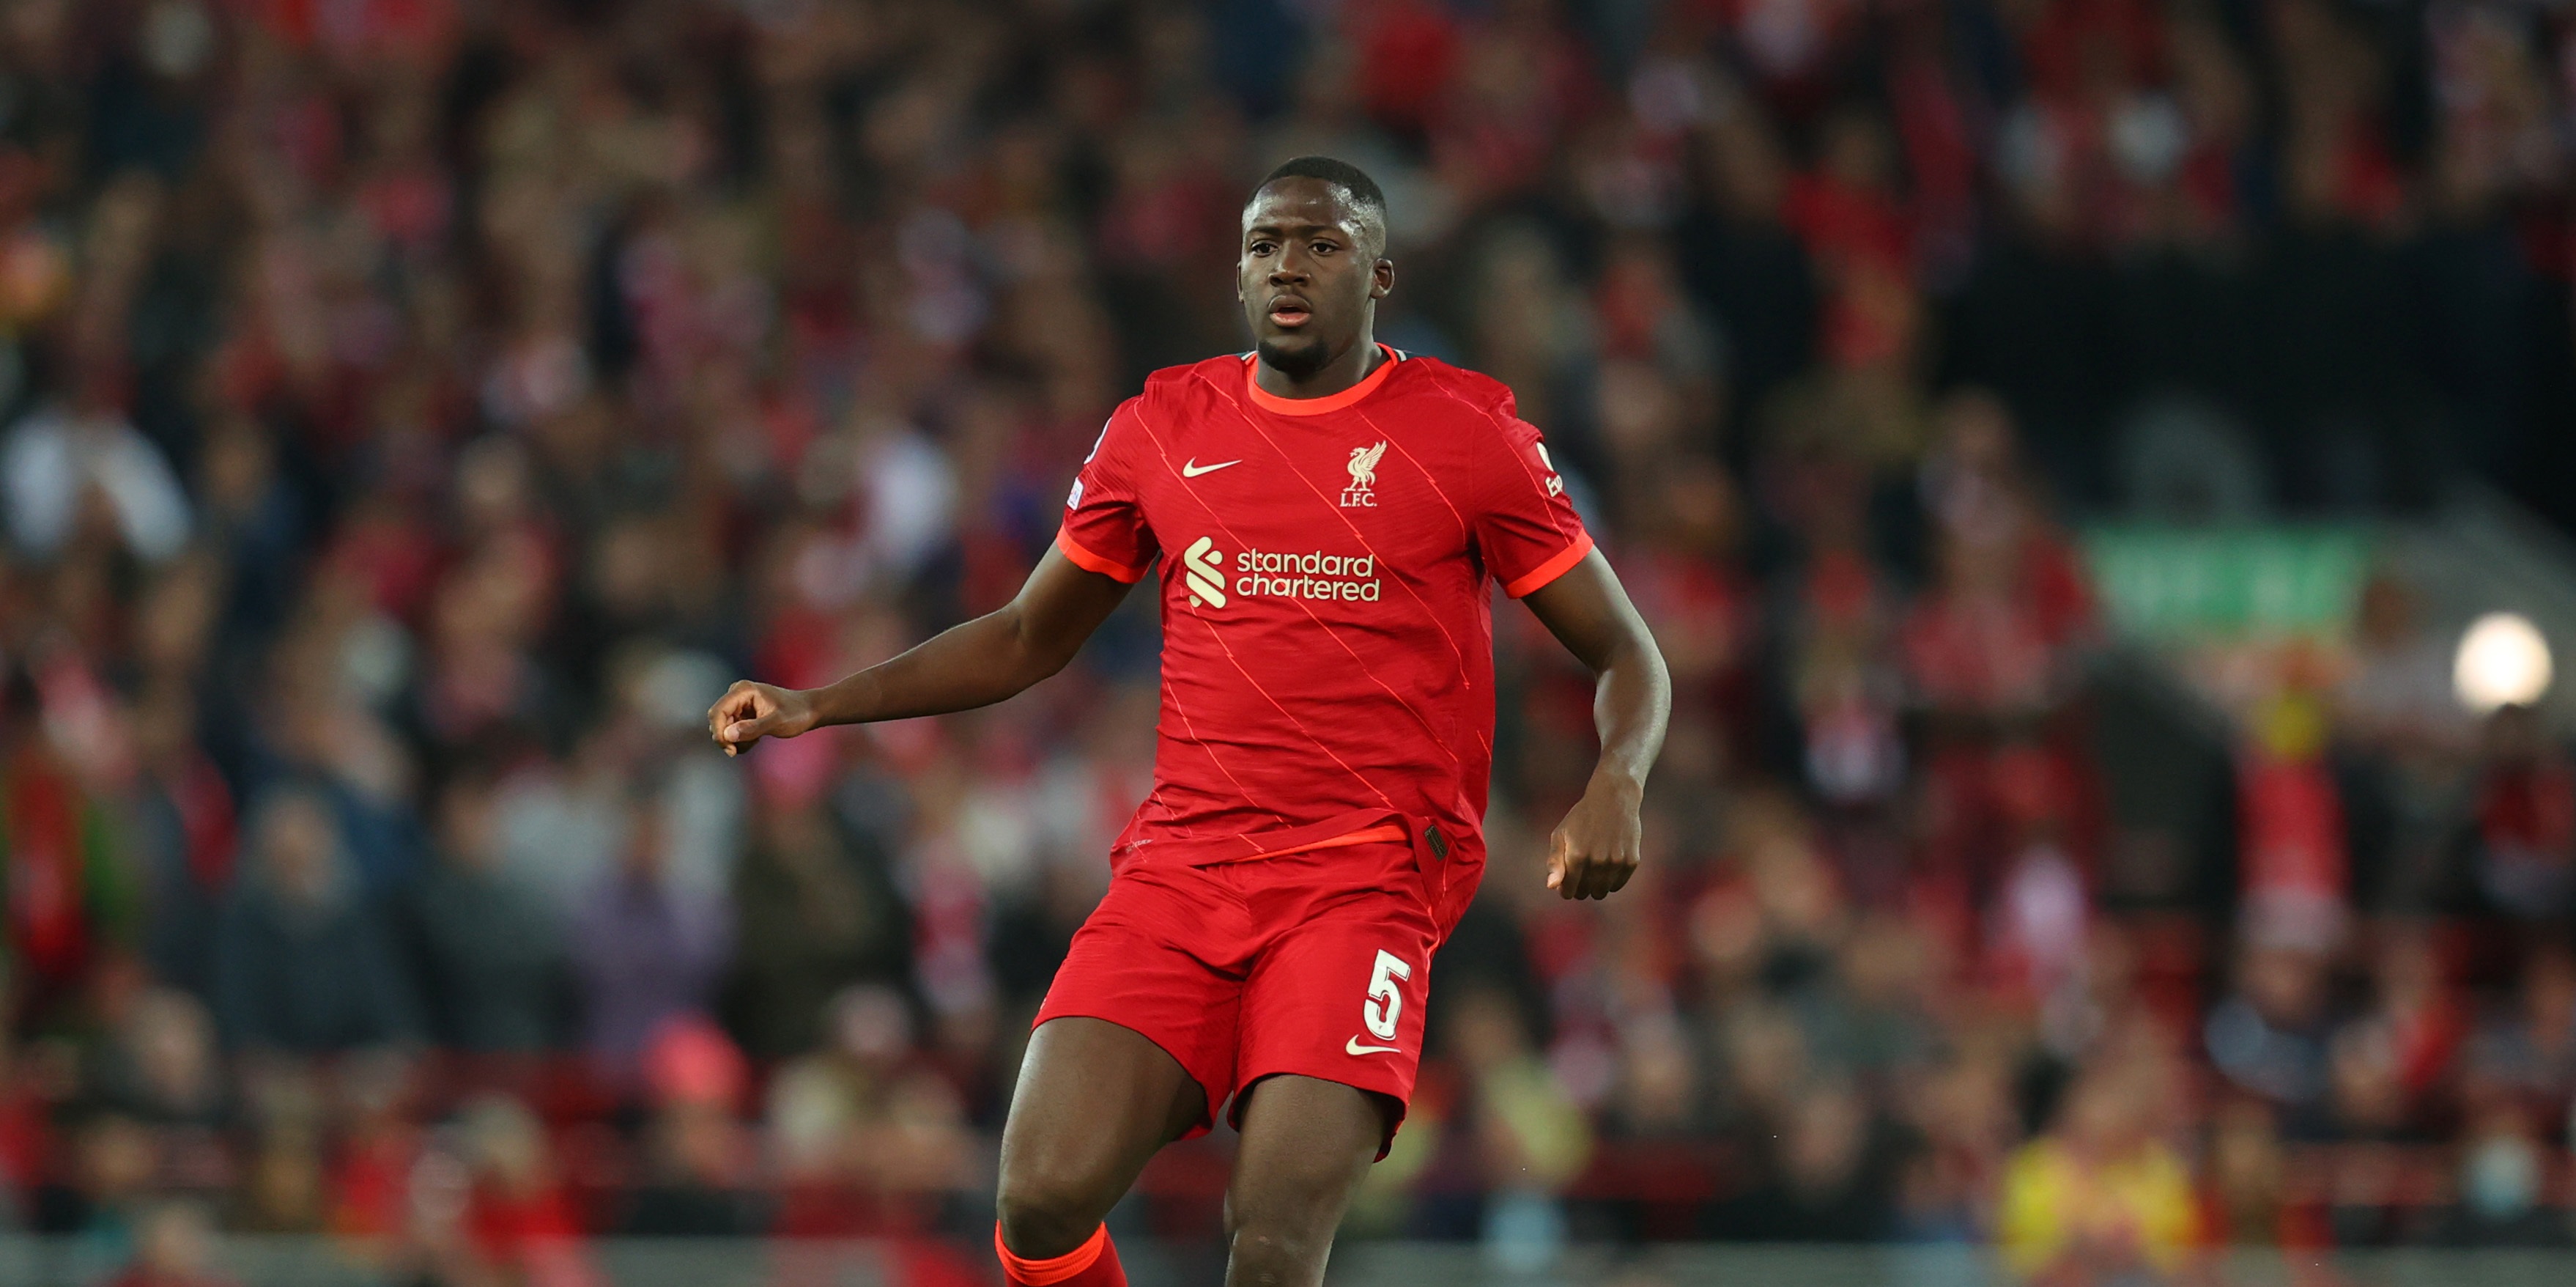 ‘I’m honestly speechless’ – Konate blown away by Champions League final change as Liverpool prepare for Real Madrid clash